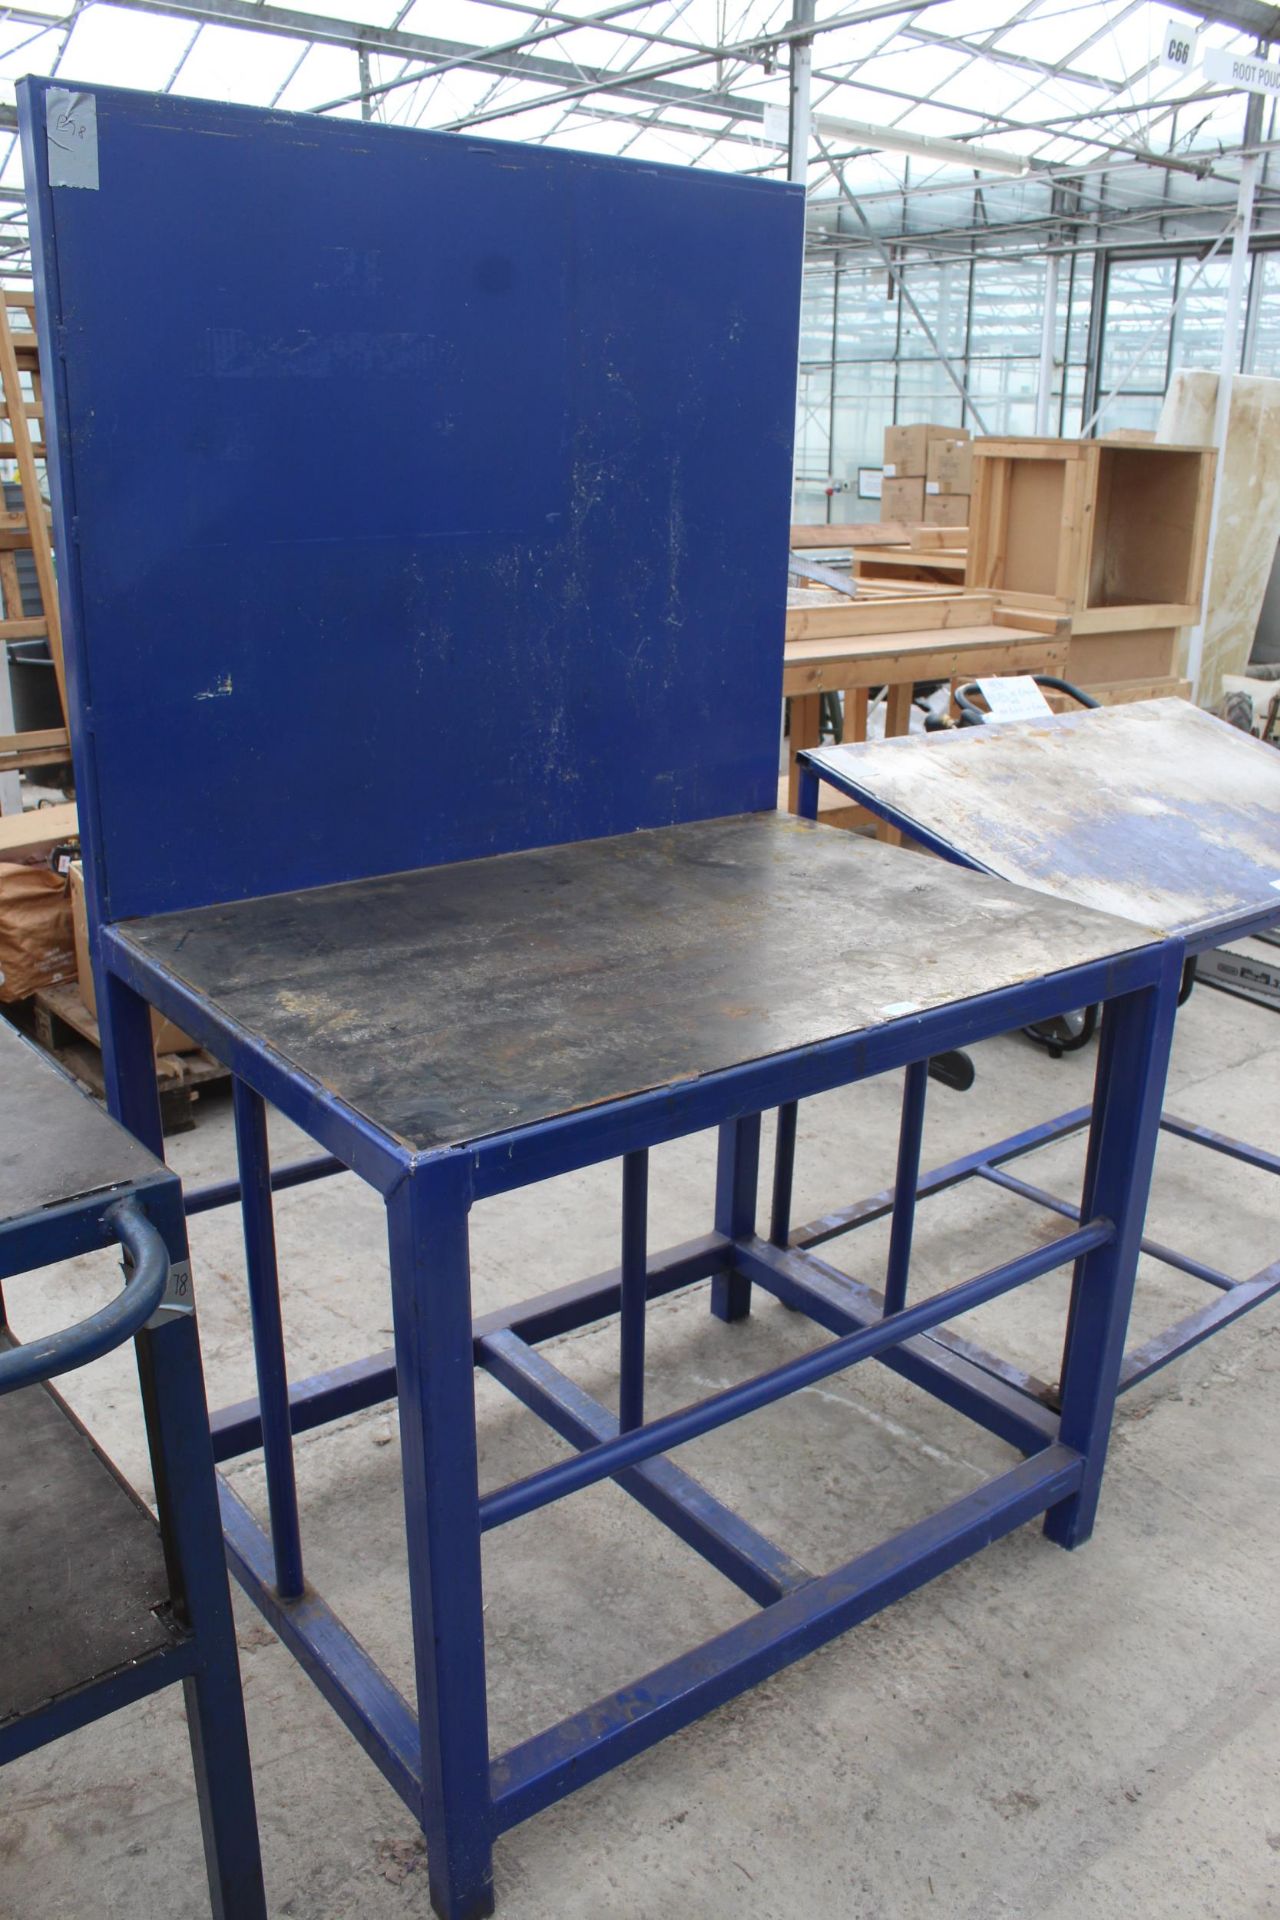 A HEAVY DUTYB STEEL BENCH WITH A BACK + VAT